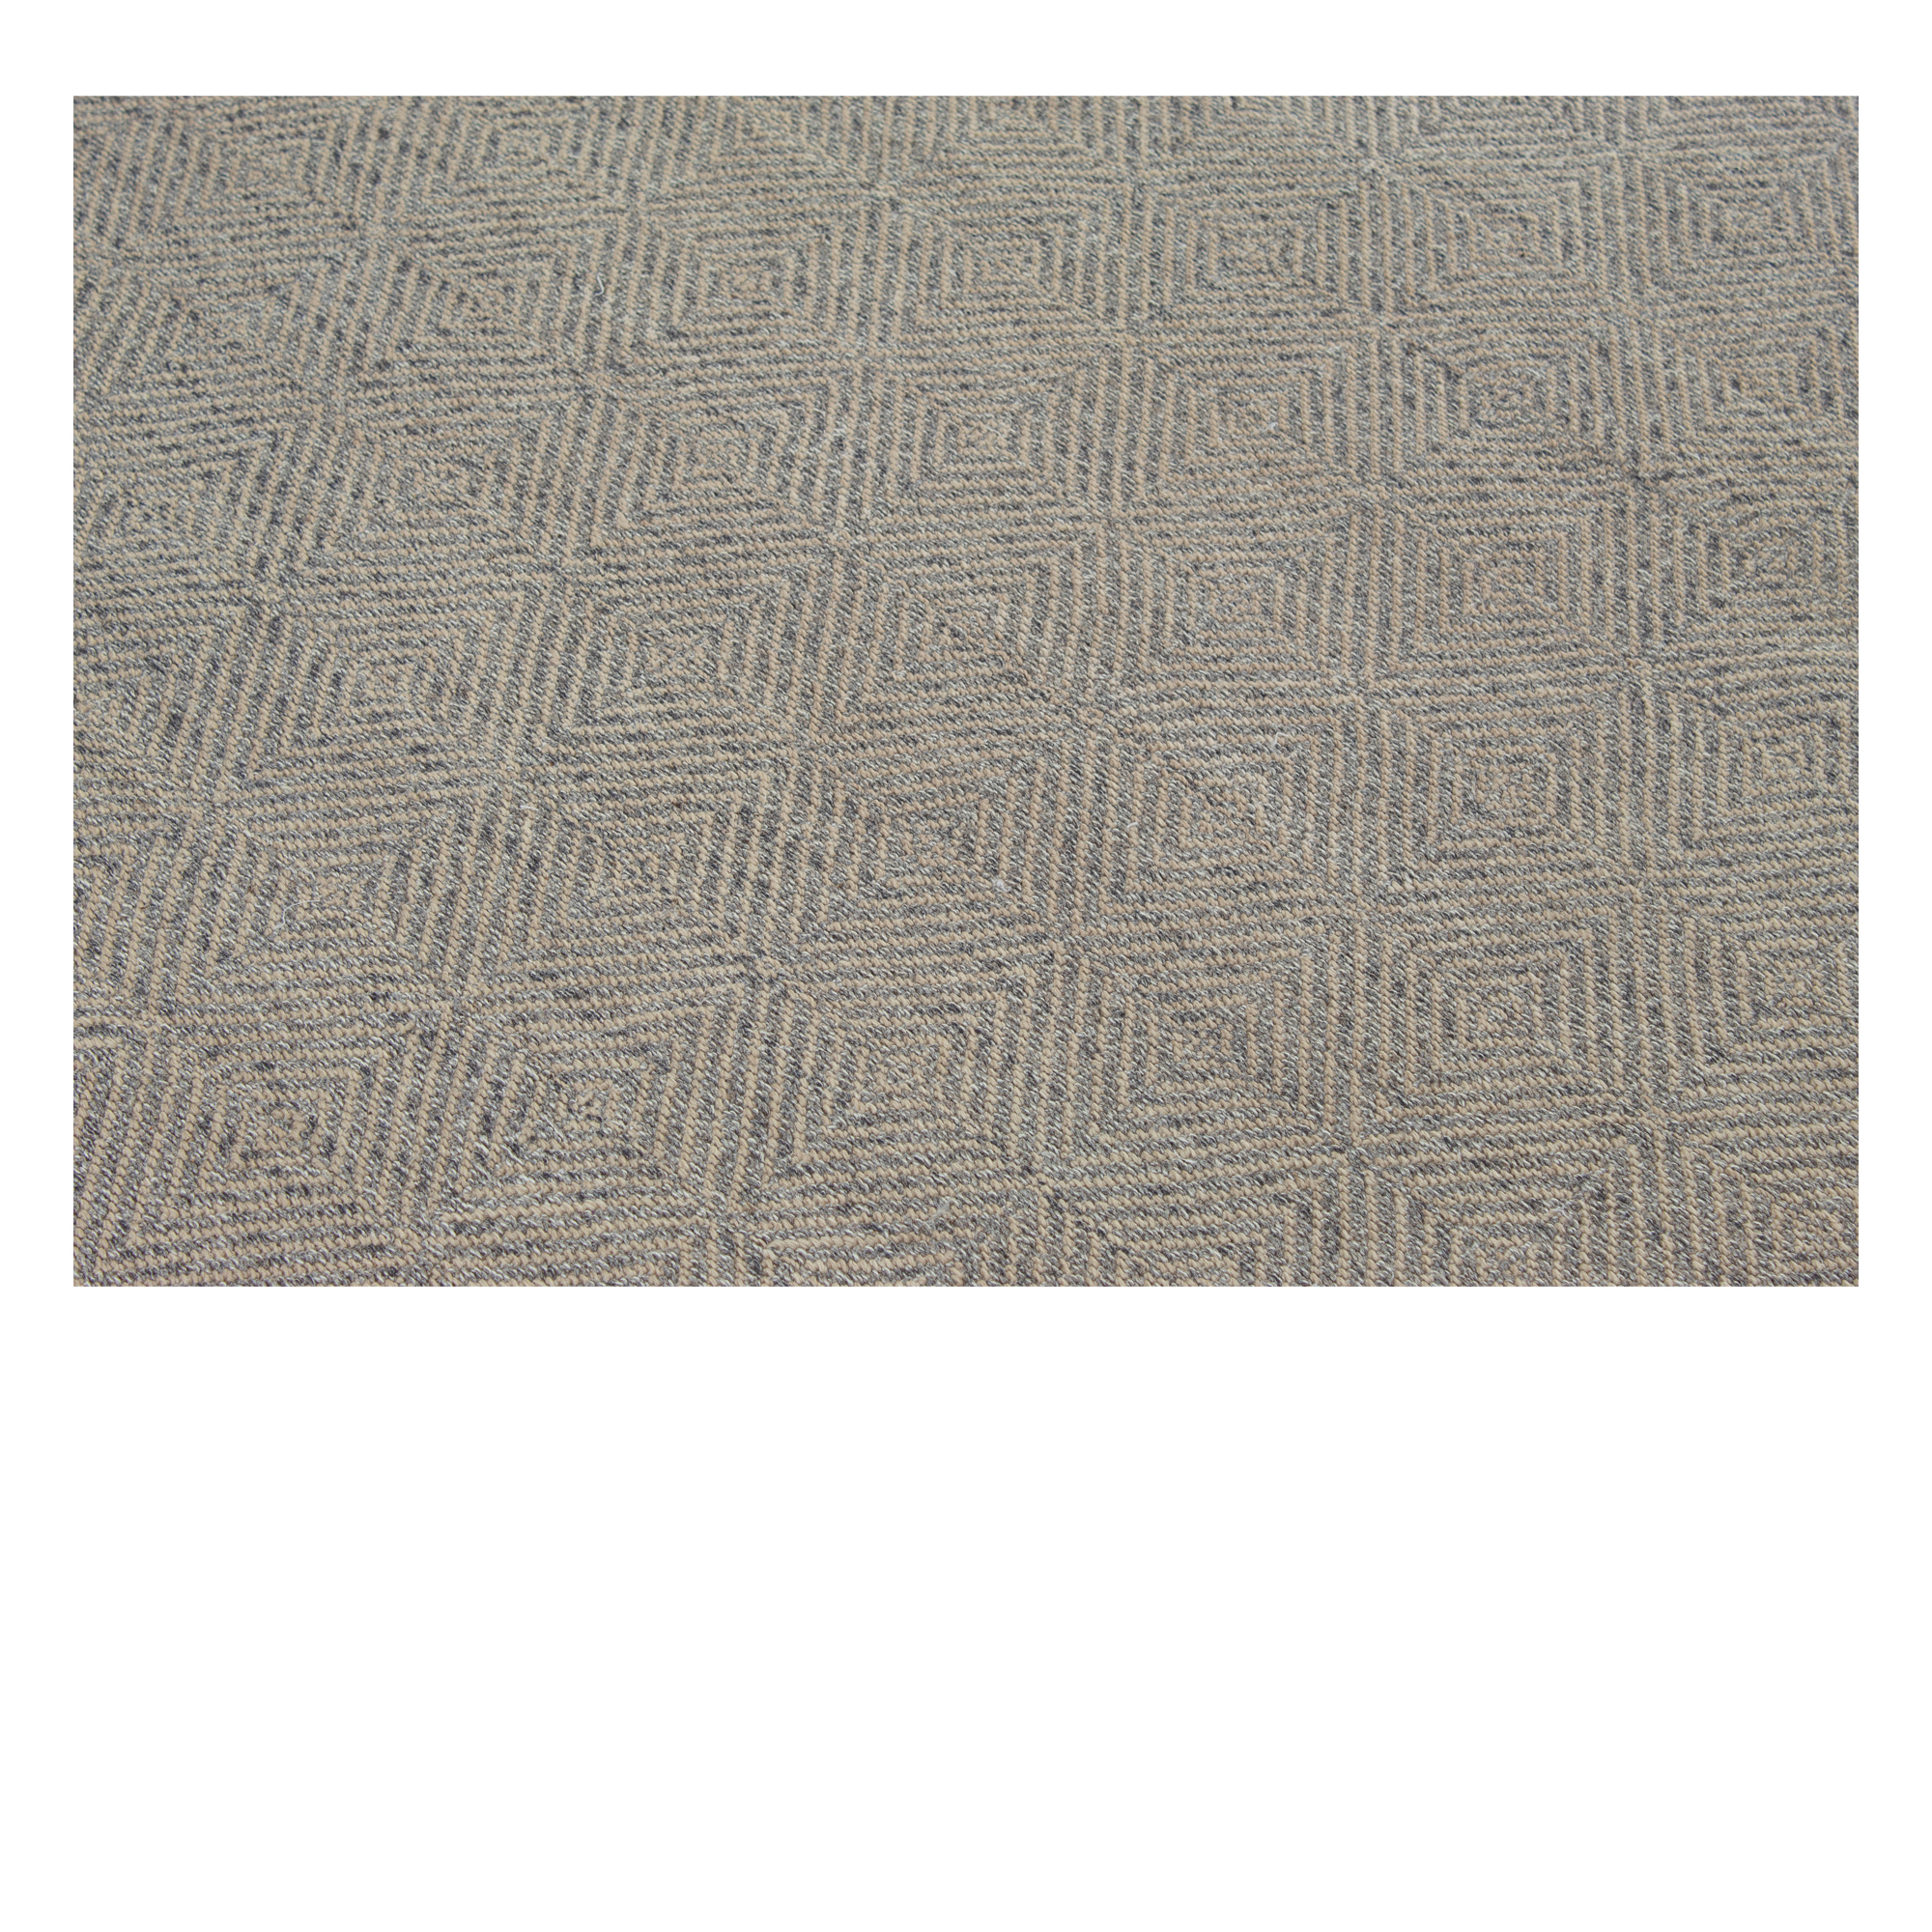 Diamond rug is a modern flatweave crafted from the finest handspun wool. 